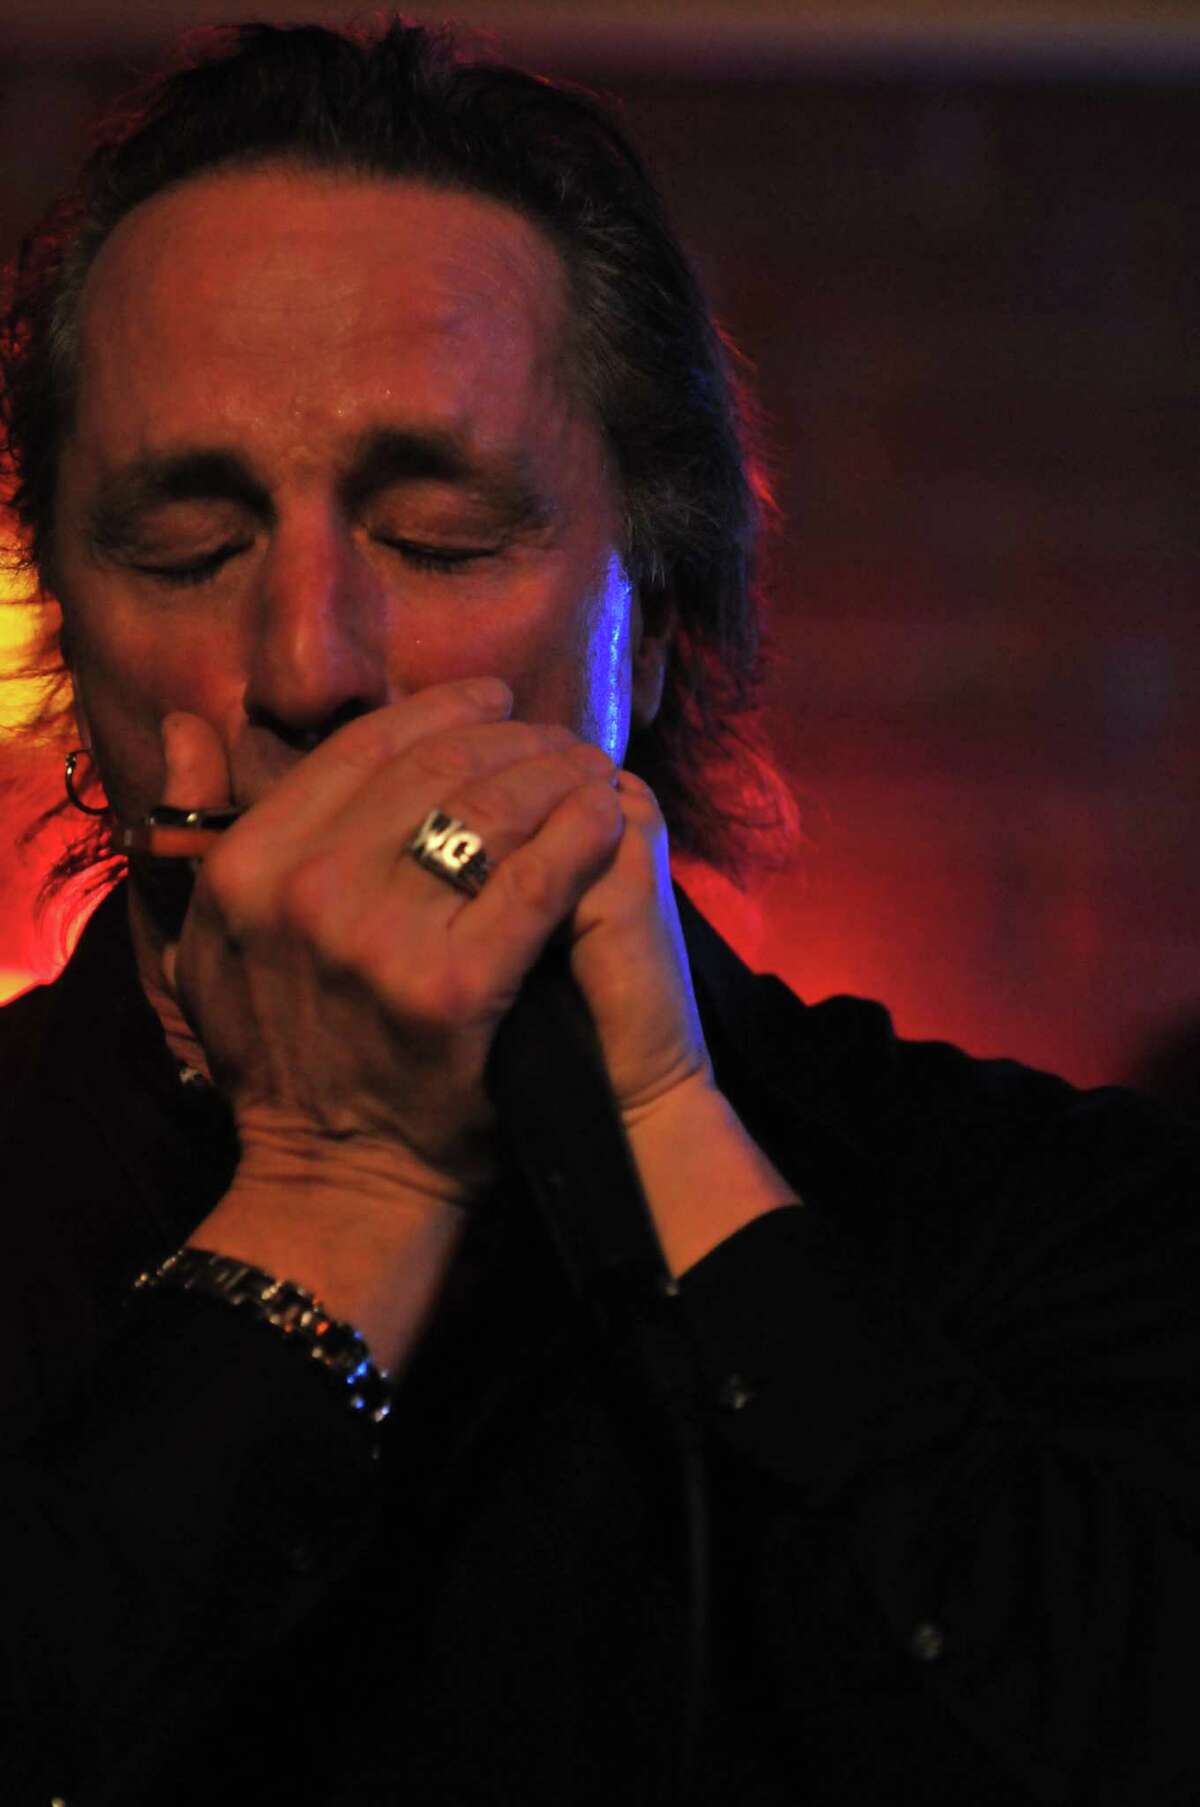 New England blues musician extraordinaire James Montgomery and his band are performing Sept. 3 at Bridge Street Live.